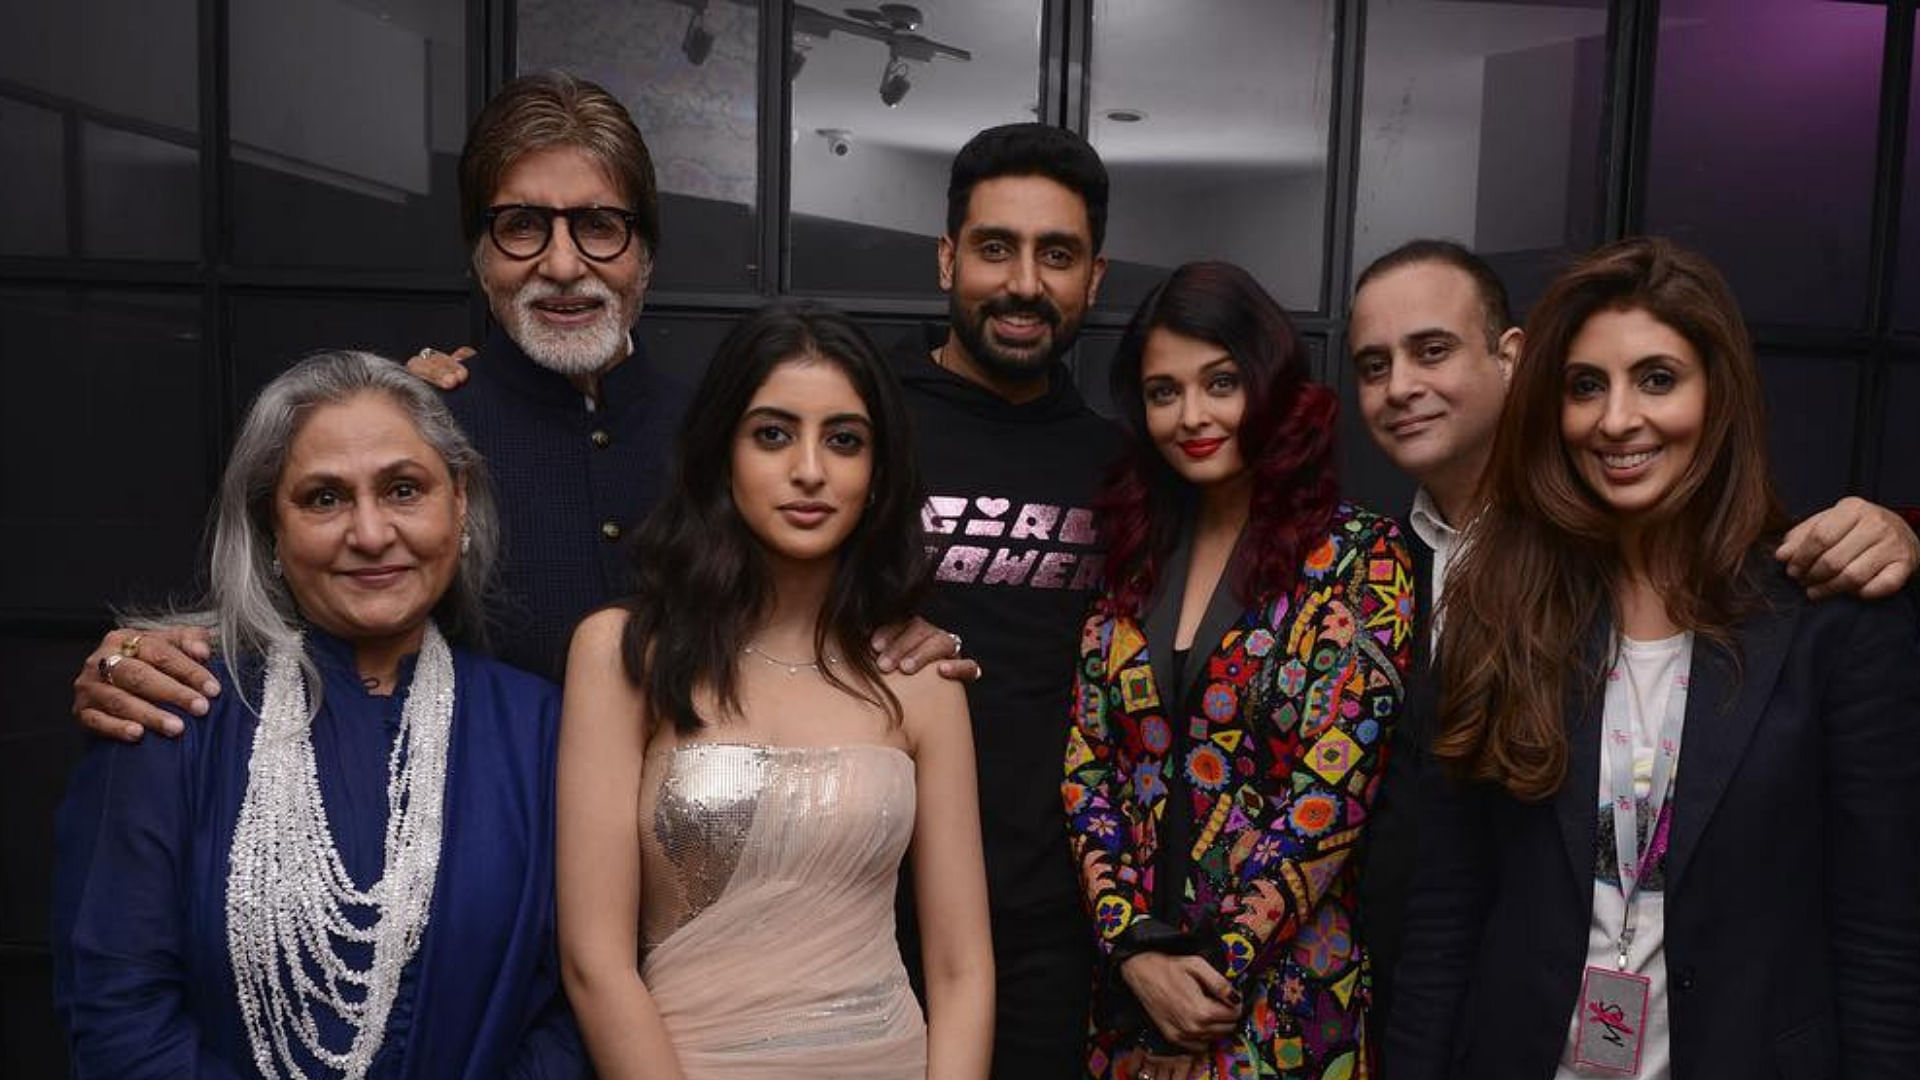 The Bachchan family pose together.